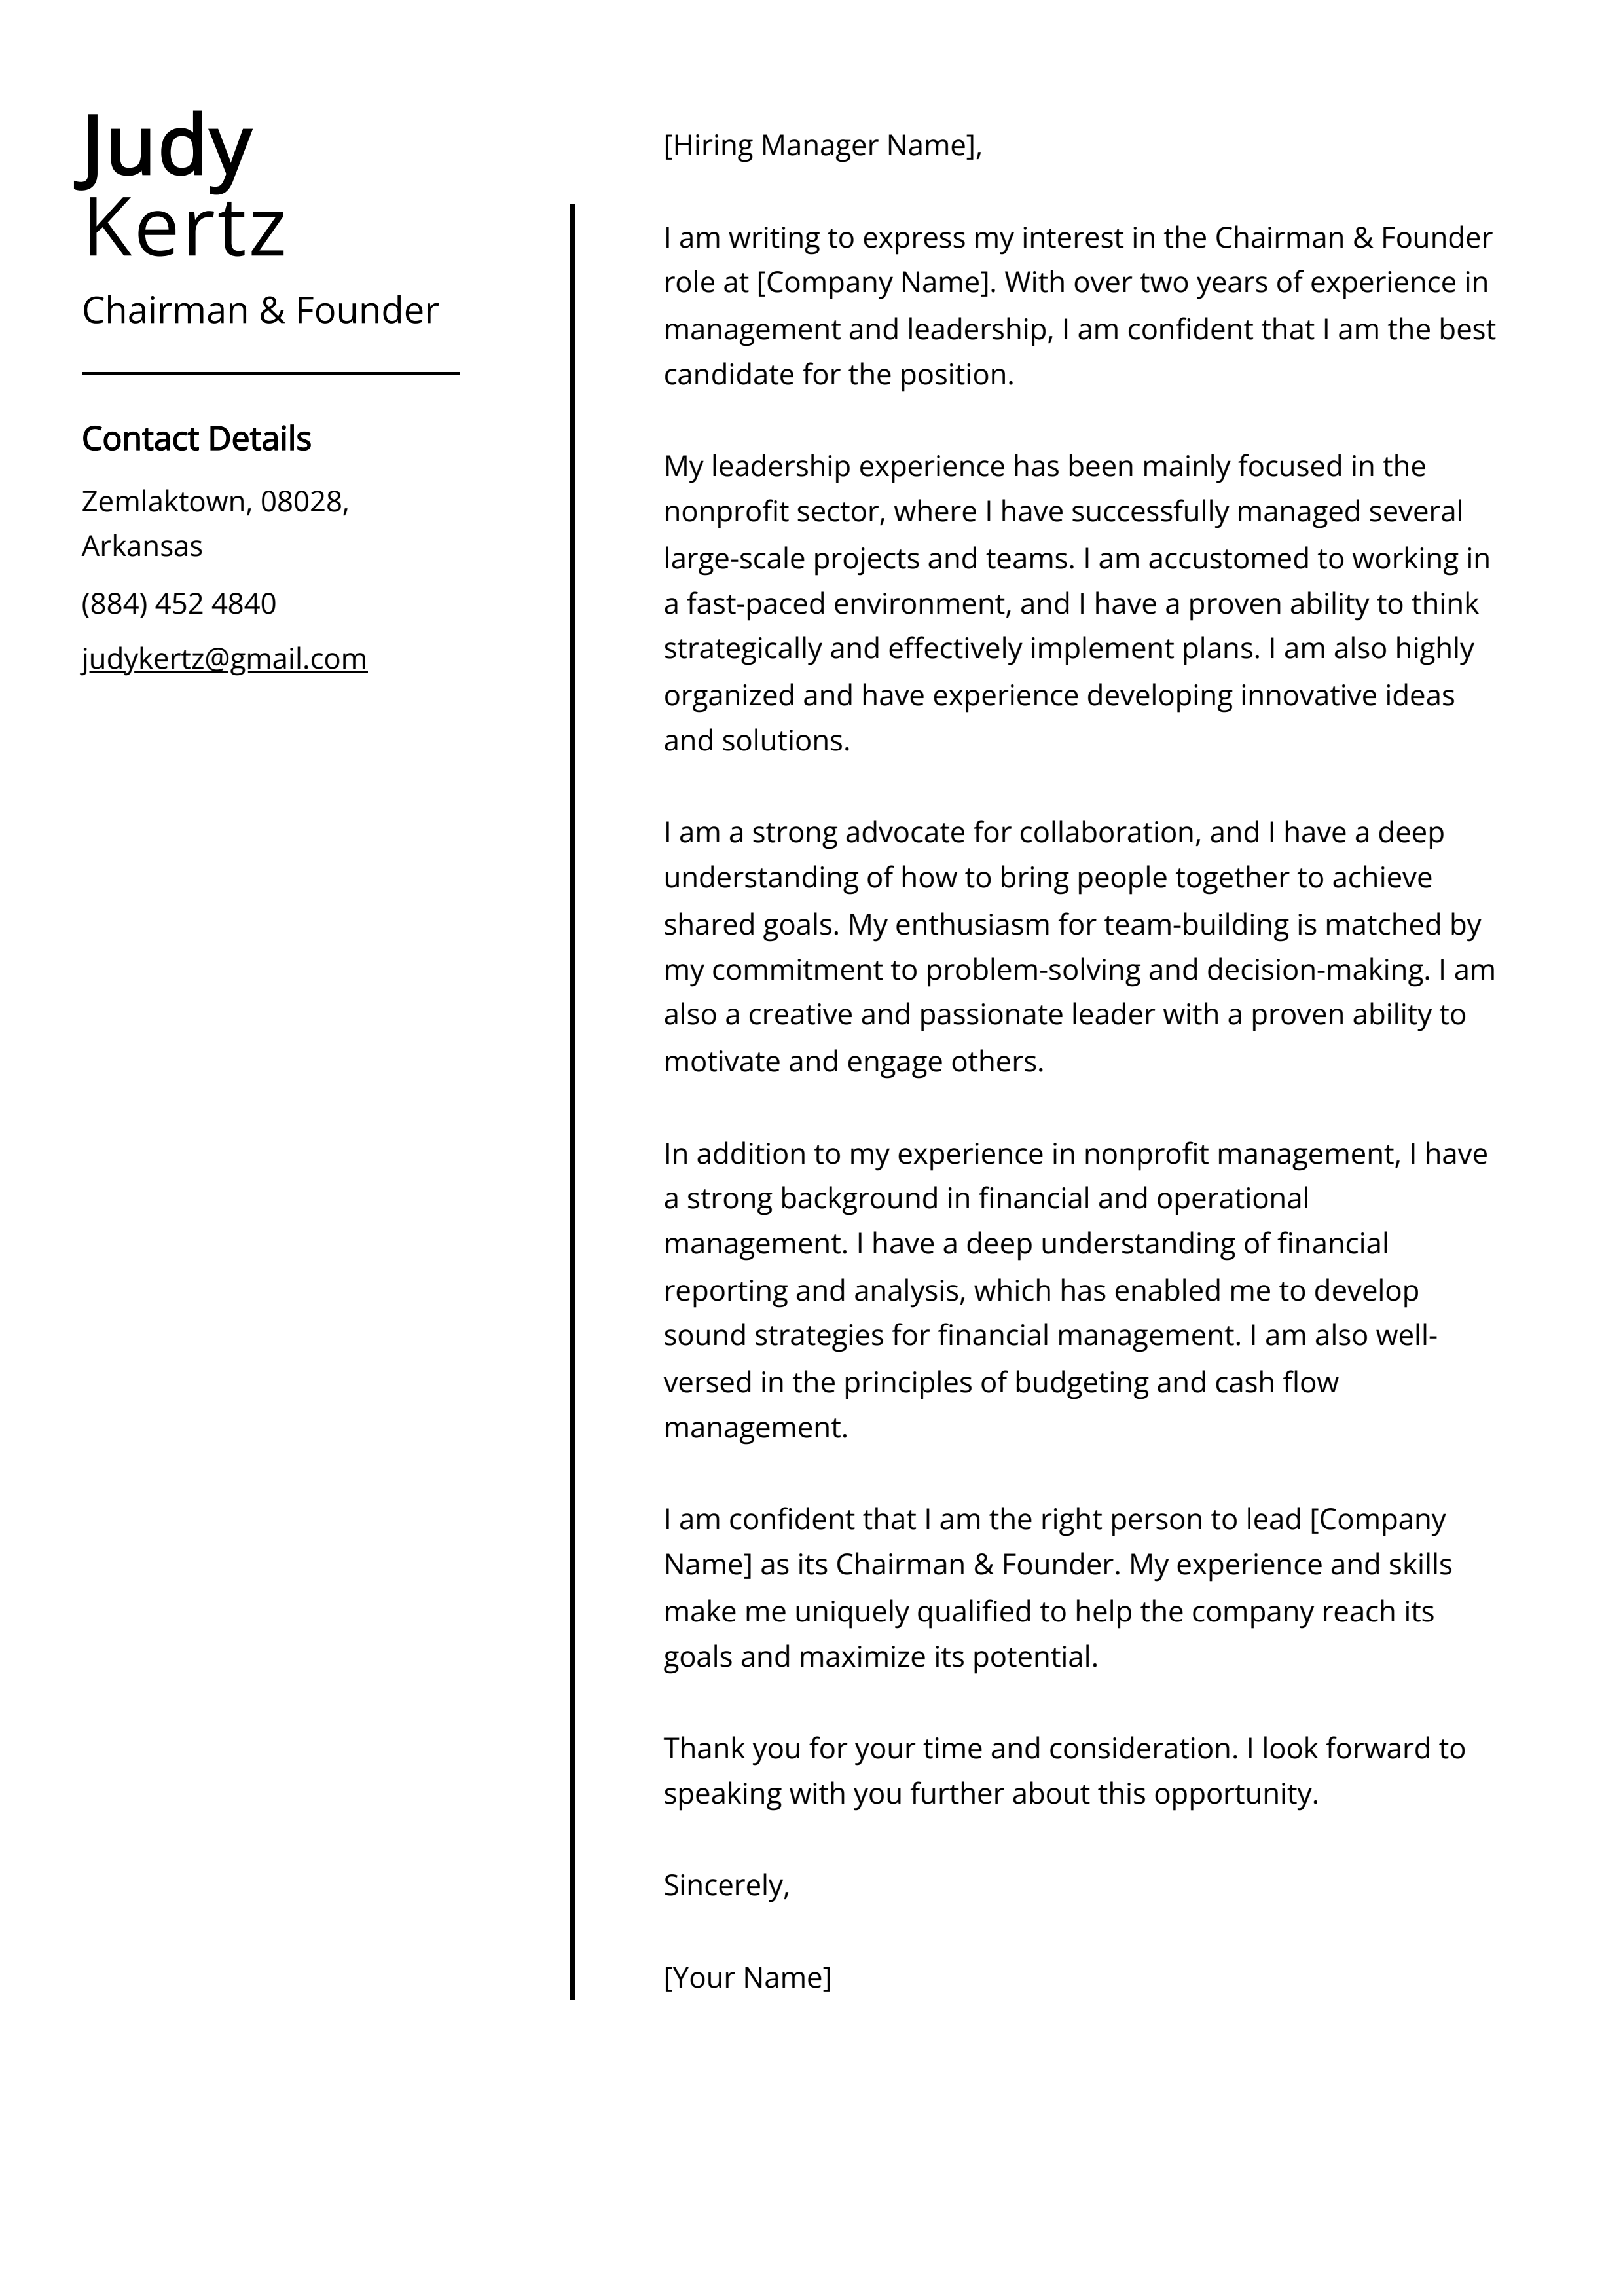 Chairman & Founder Cover Letter Example